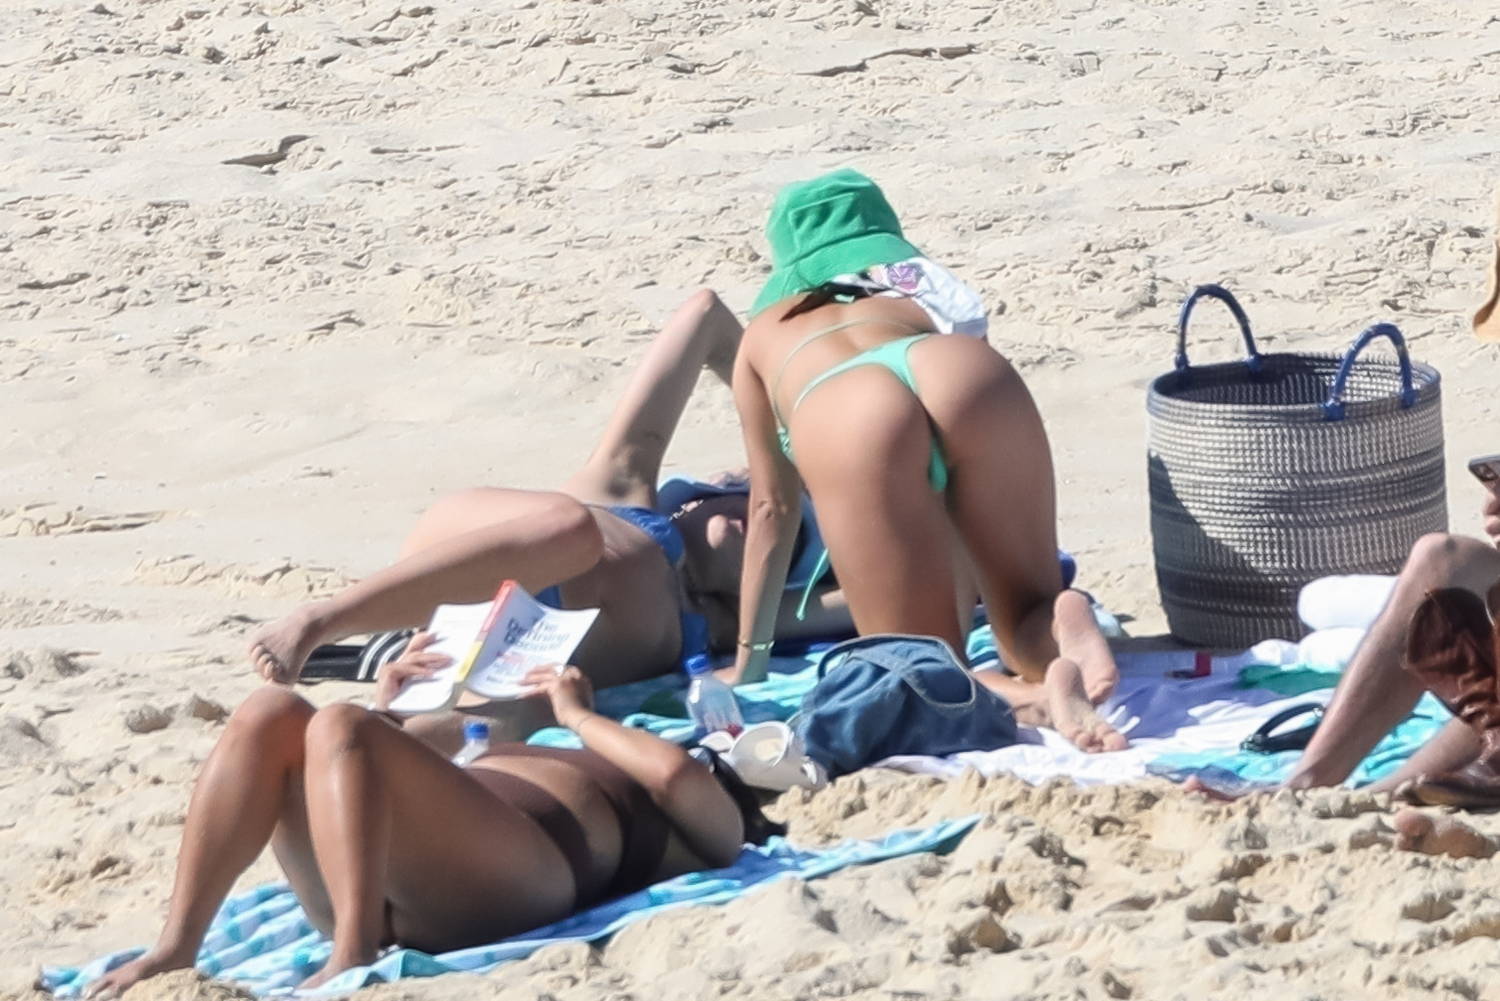 Vanessa Hudgens showcases her figure in neon green thong bikini and hat at  the beach in Mexico